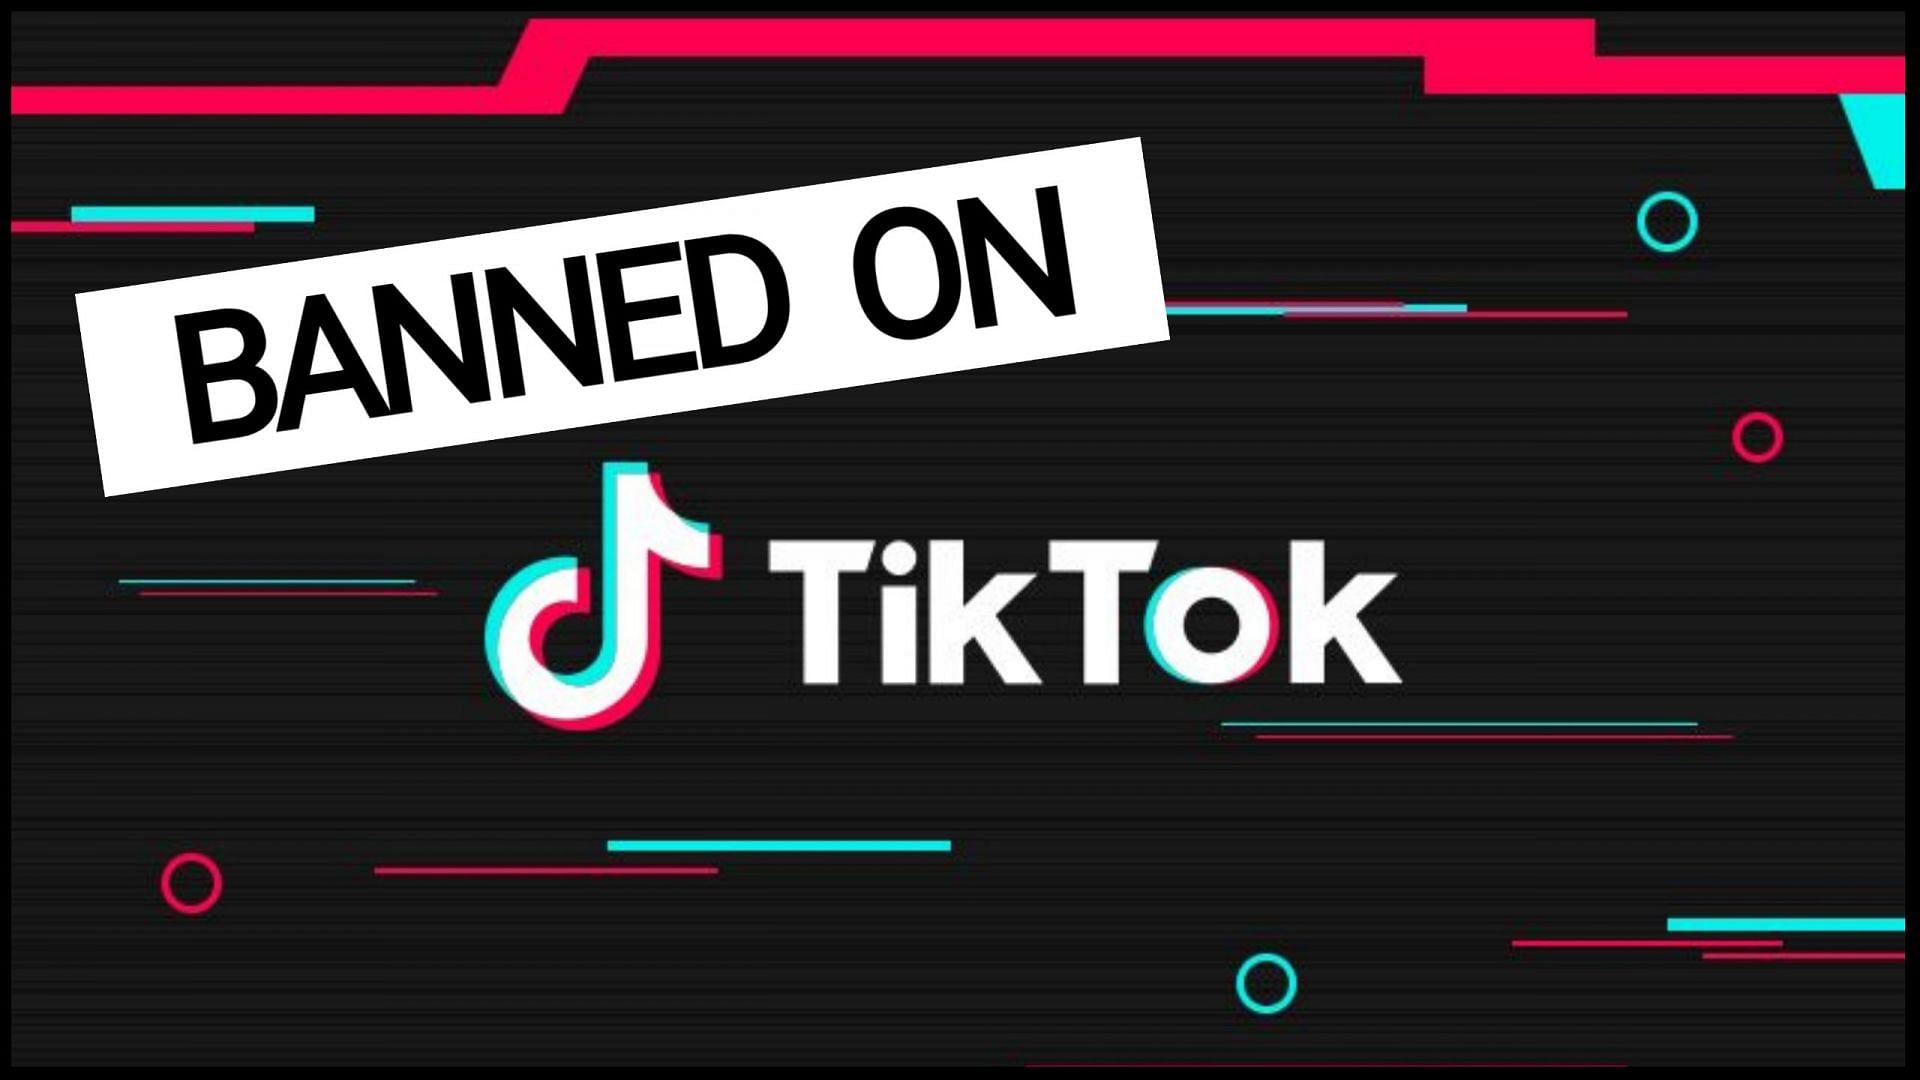 Why was my TikTok account banned? How to get unbanned